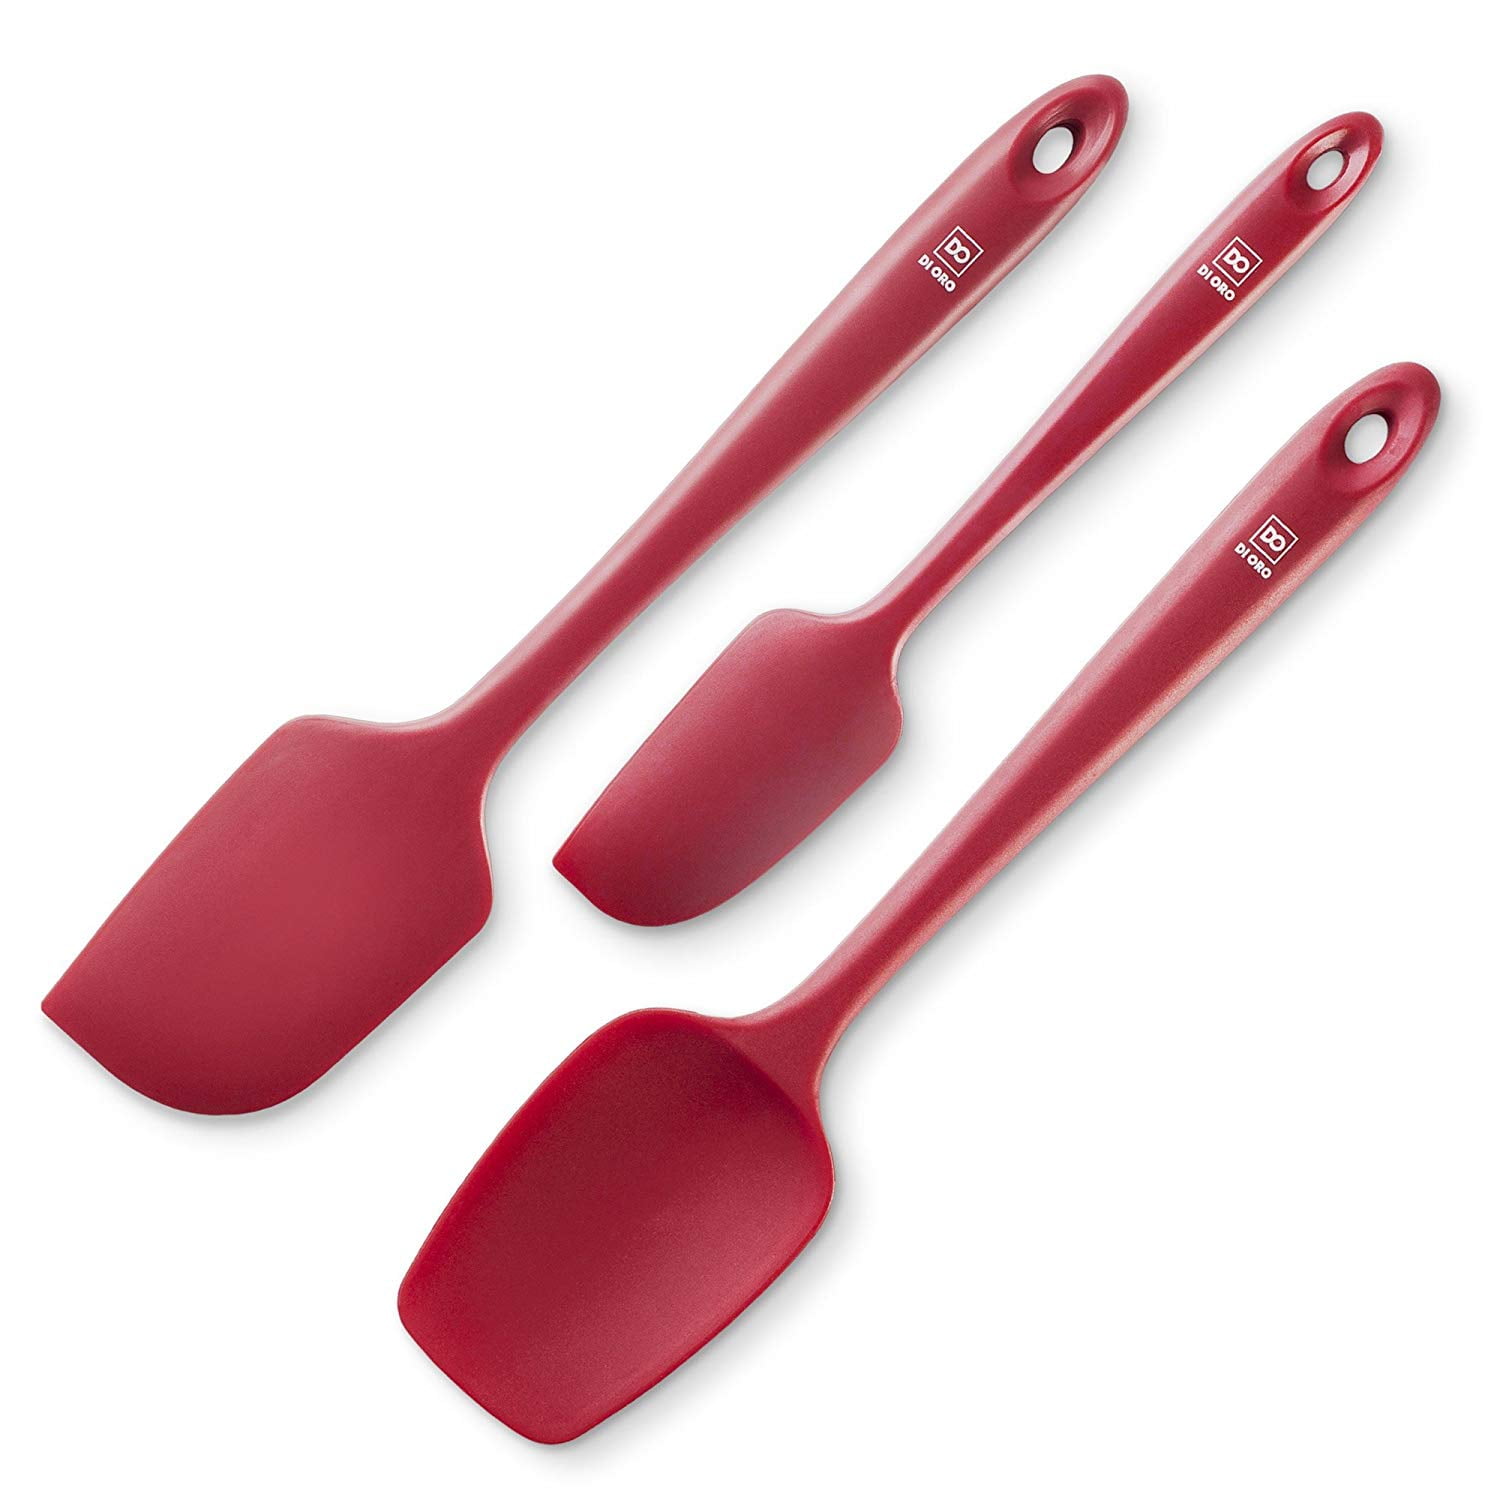 Multicolor Silicone Spatula Set - 446°F Heat Resistant Rubber Spatulas for  Cooking,Baking,Mixing.One…See more Multicolor Silicone Spatula Set - 446°F